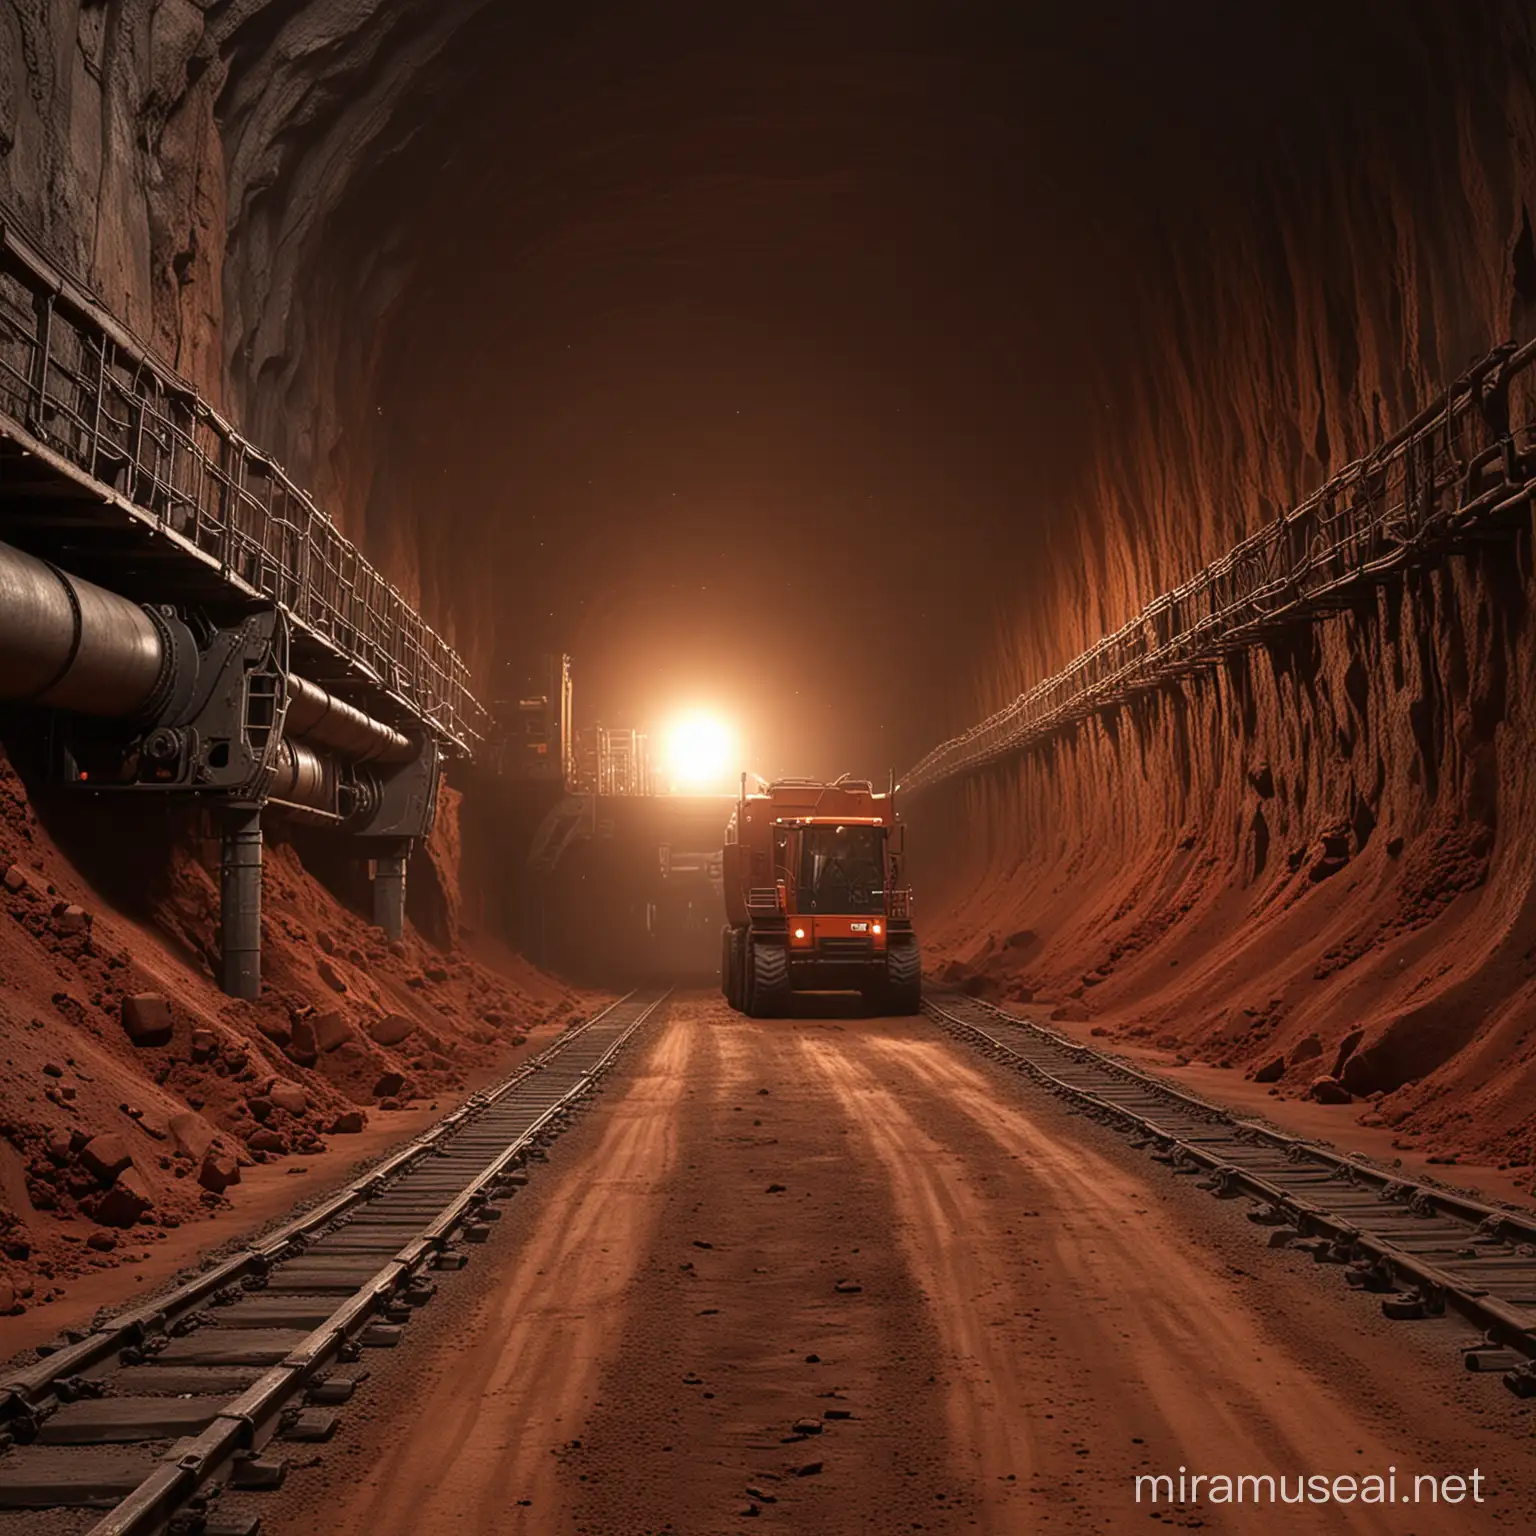 Gigantic Mining Drill Carving Through Martian Terrain in a Futuristic Tunneling Expedition